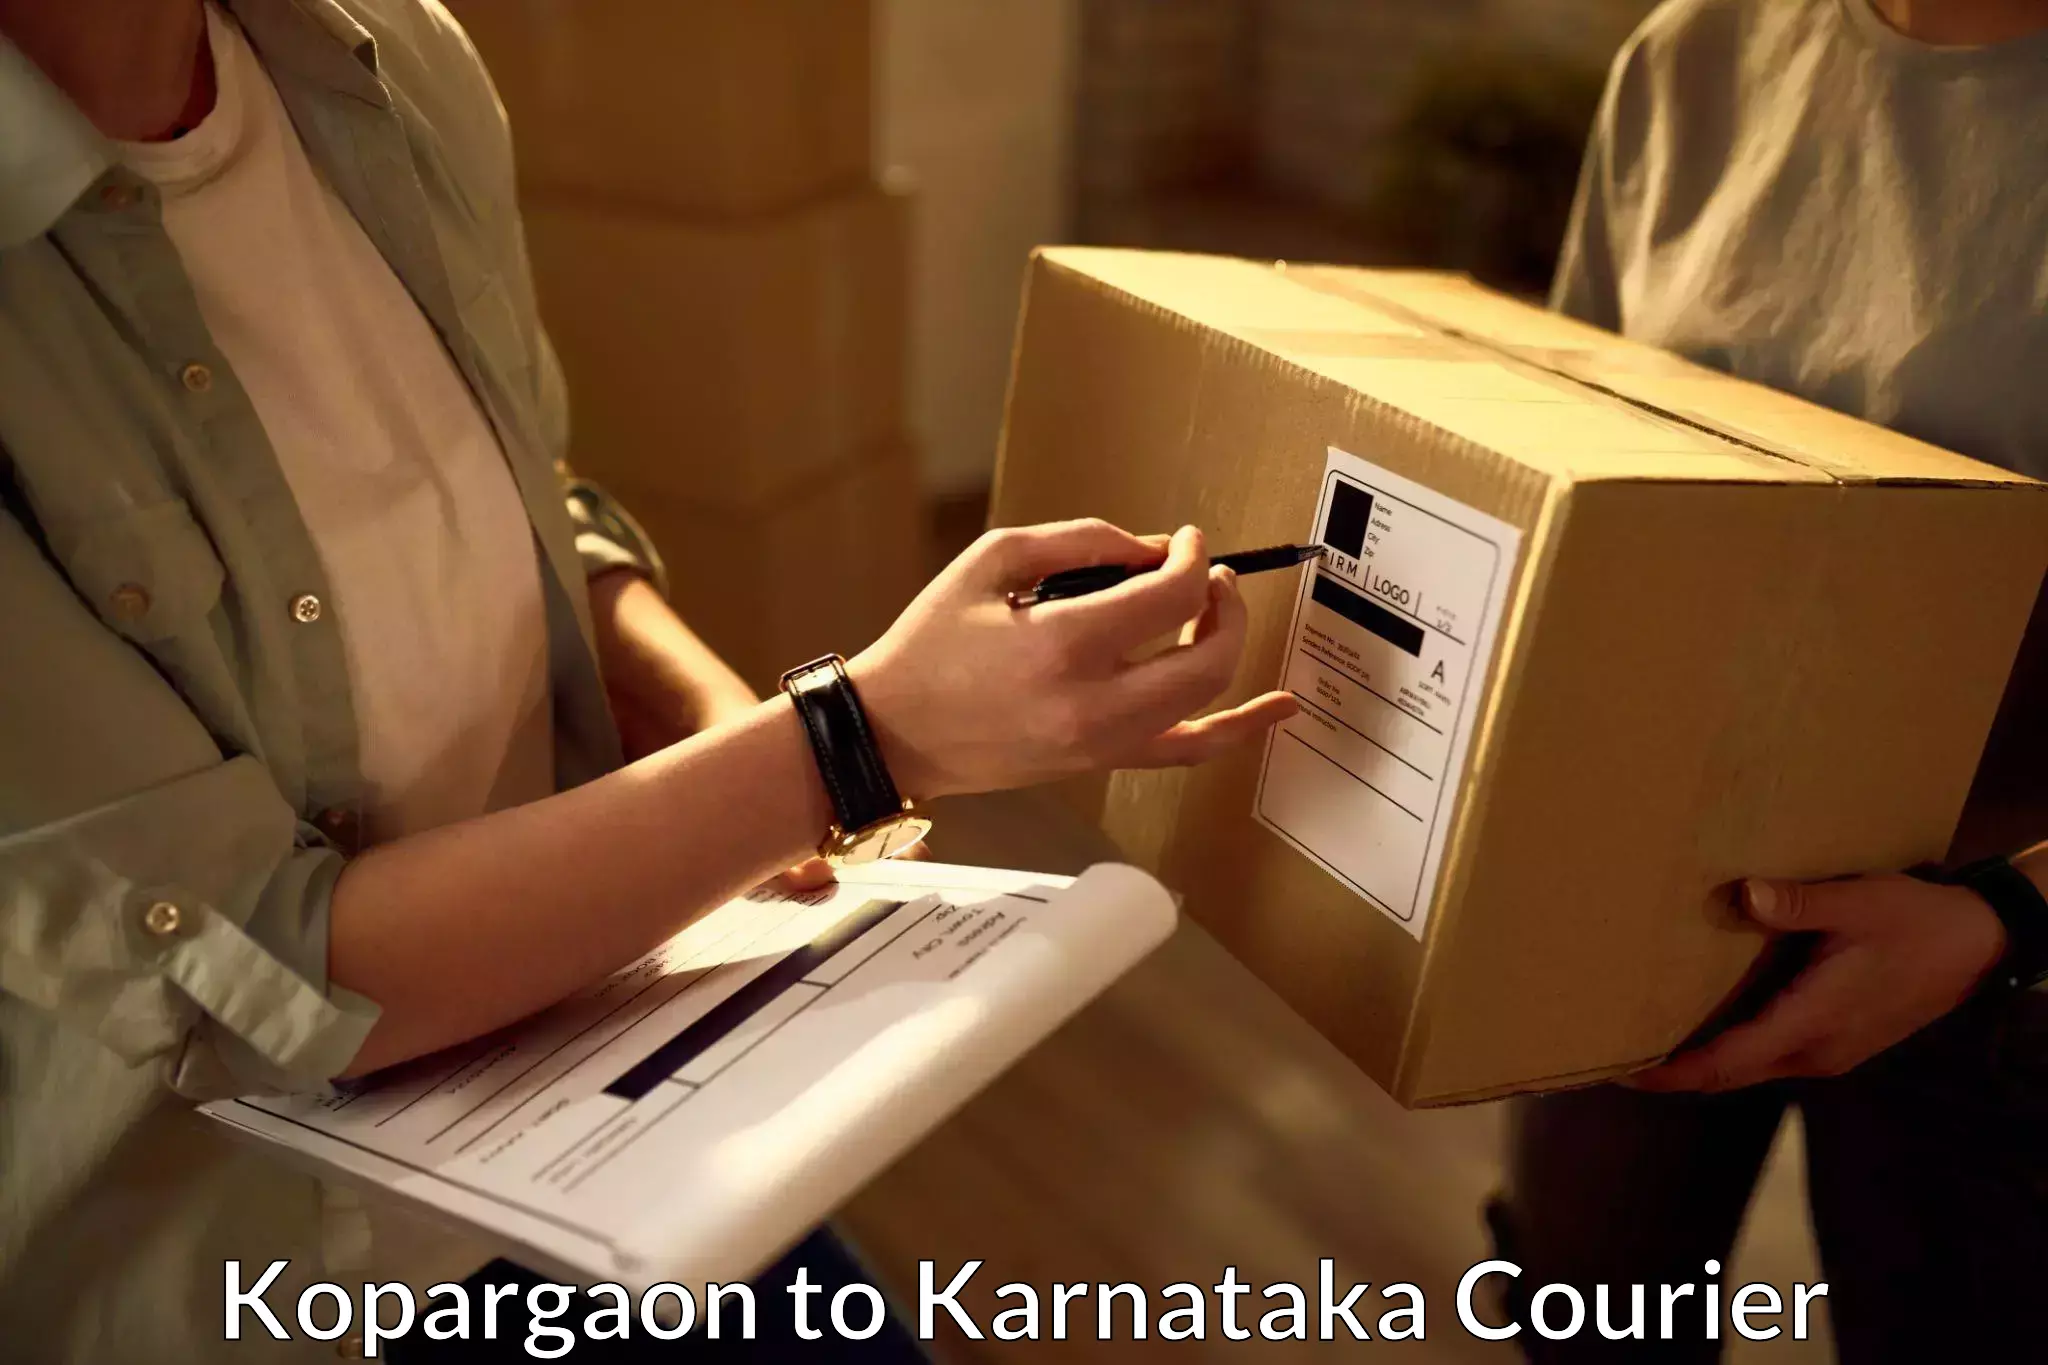 Reliable courier service Kopargaon to Muddebihal